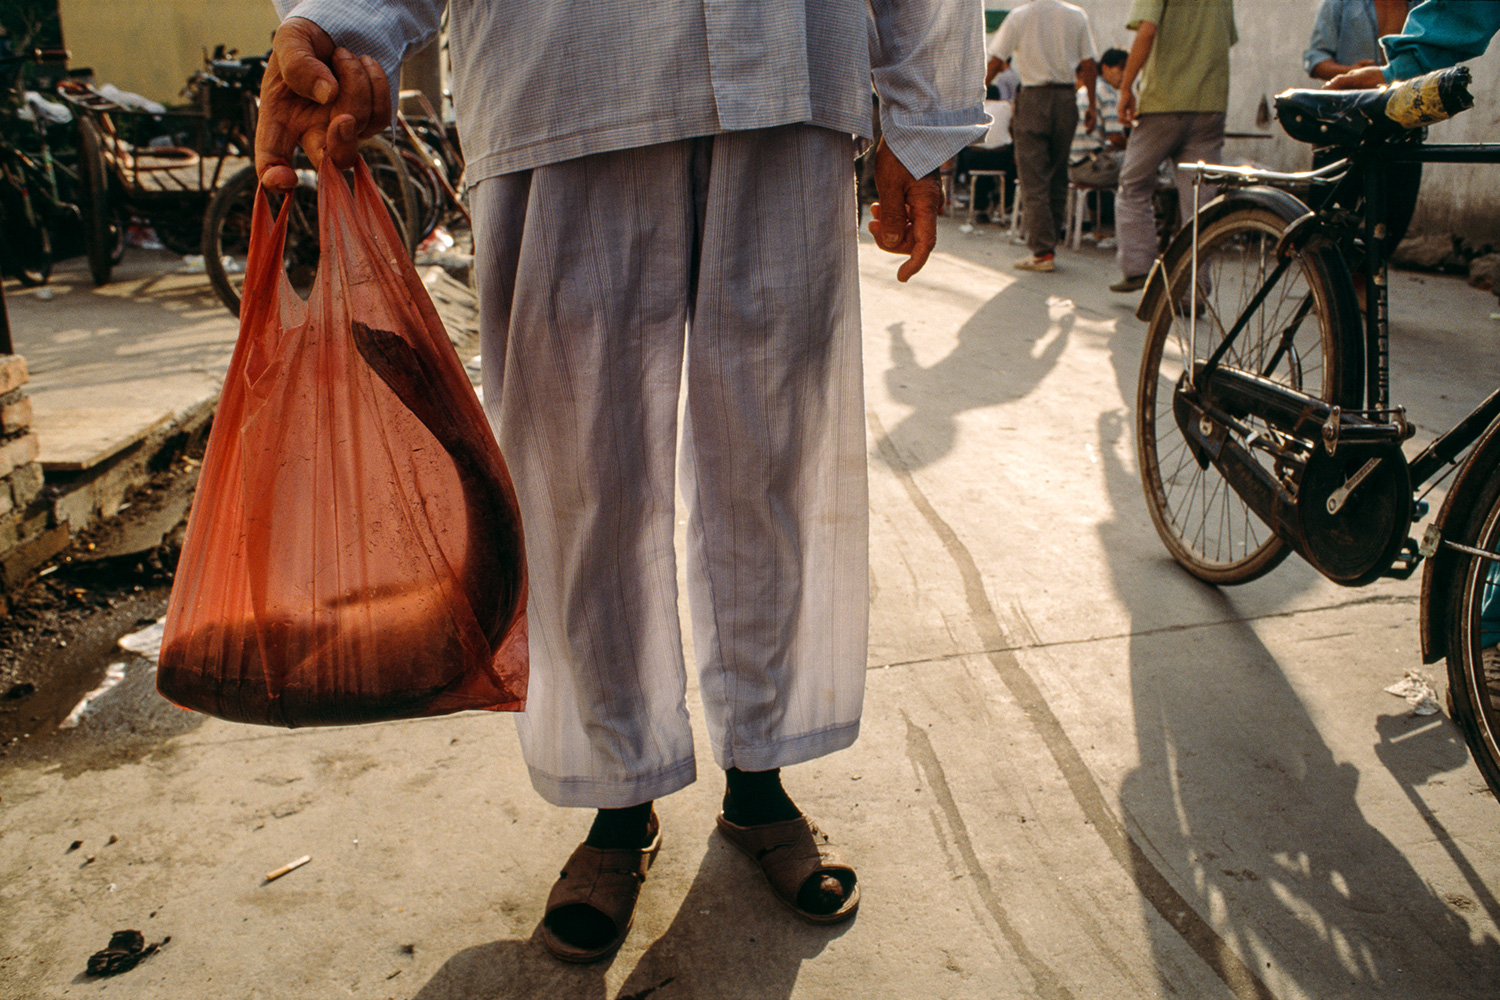 Dressed in his pajamas, a man leaves an open air market in Lujiazui with a fresh fish, 1997.